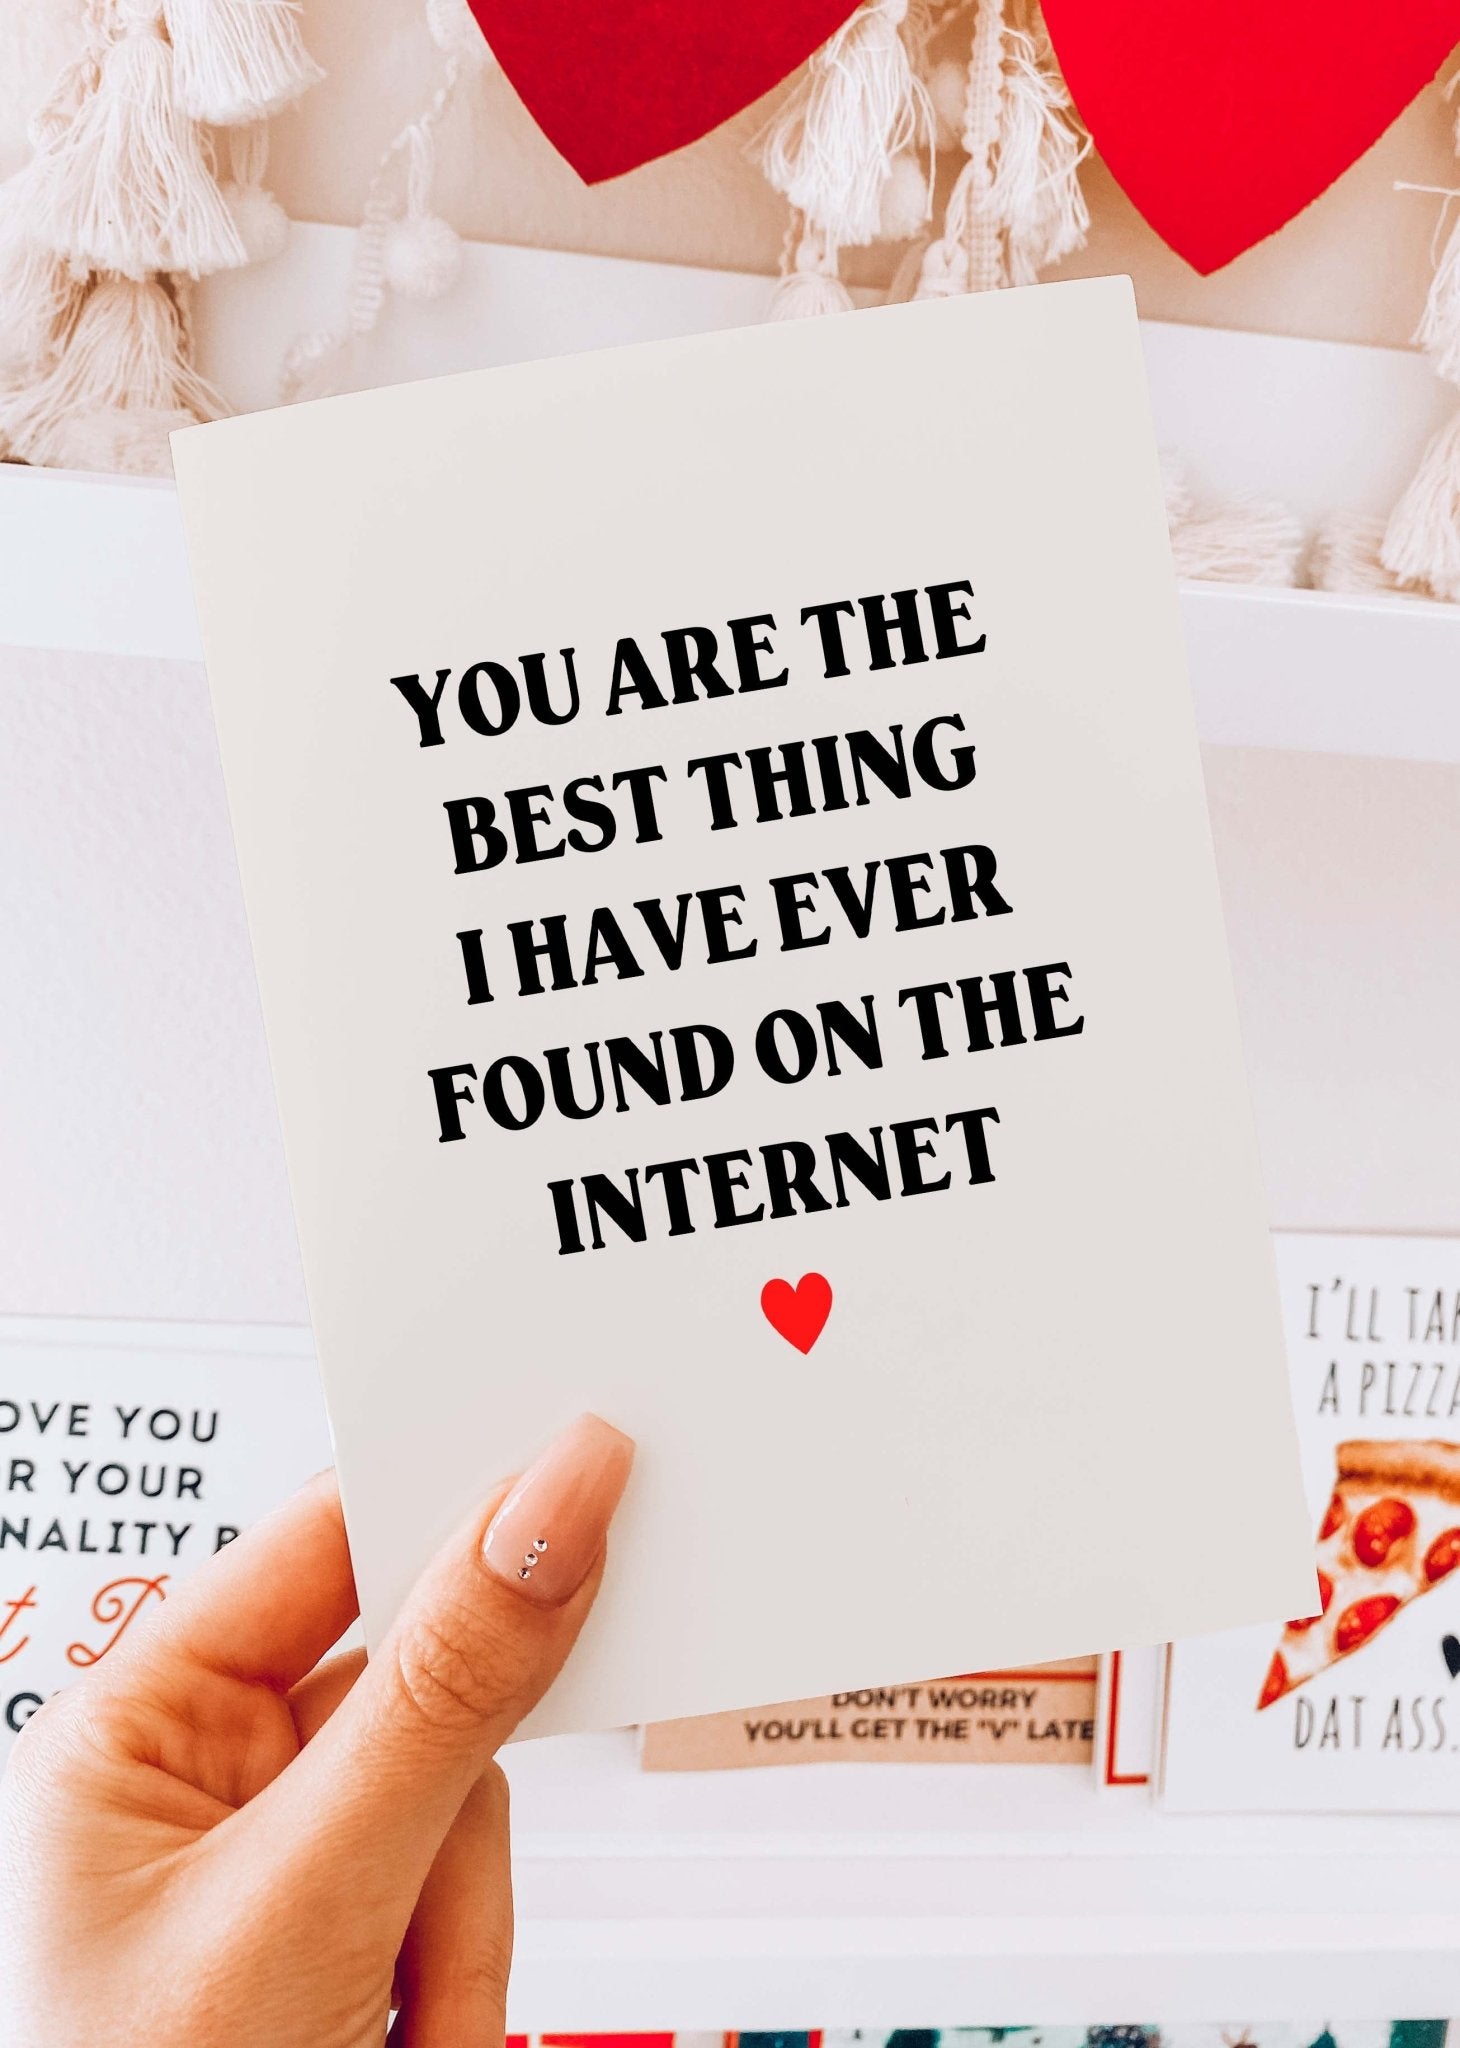 You Are The Best Thing I Have Ever Found On The Internet - UntamedEgo LLC.